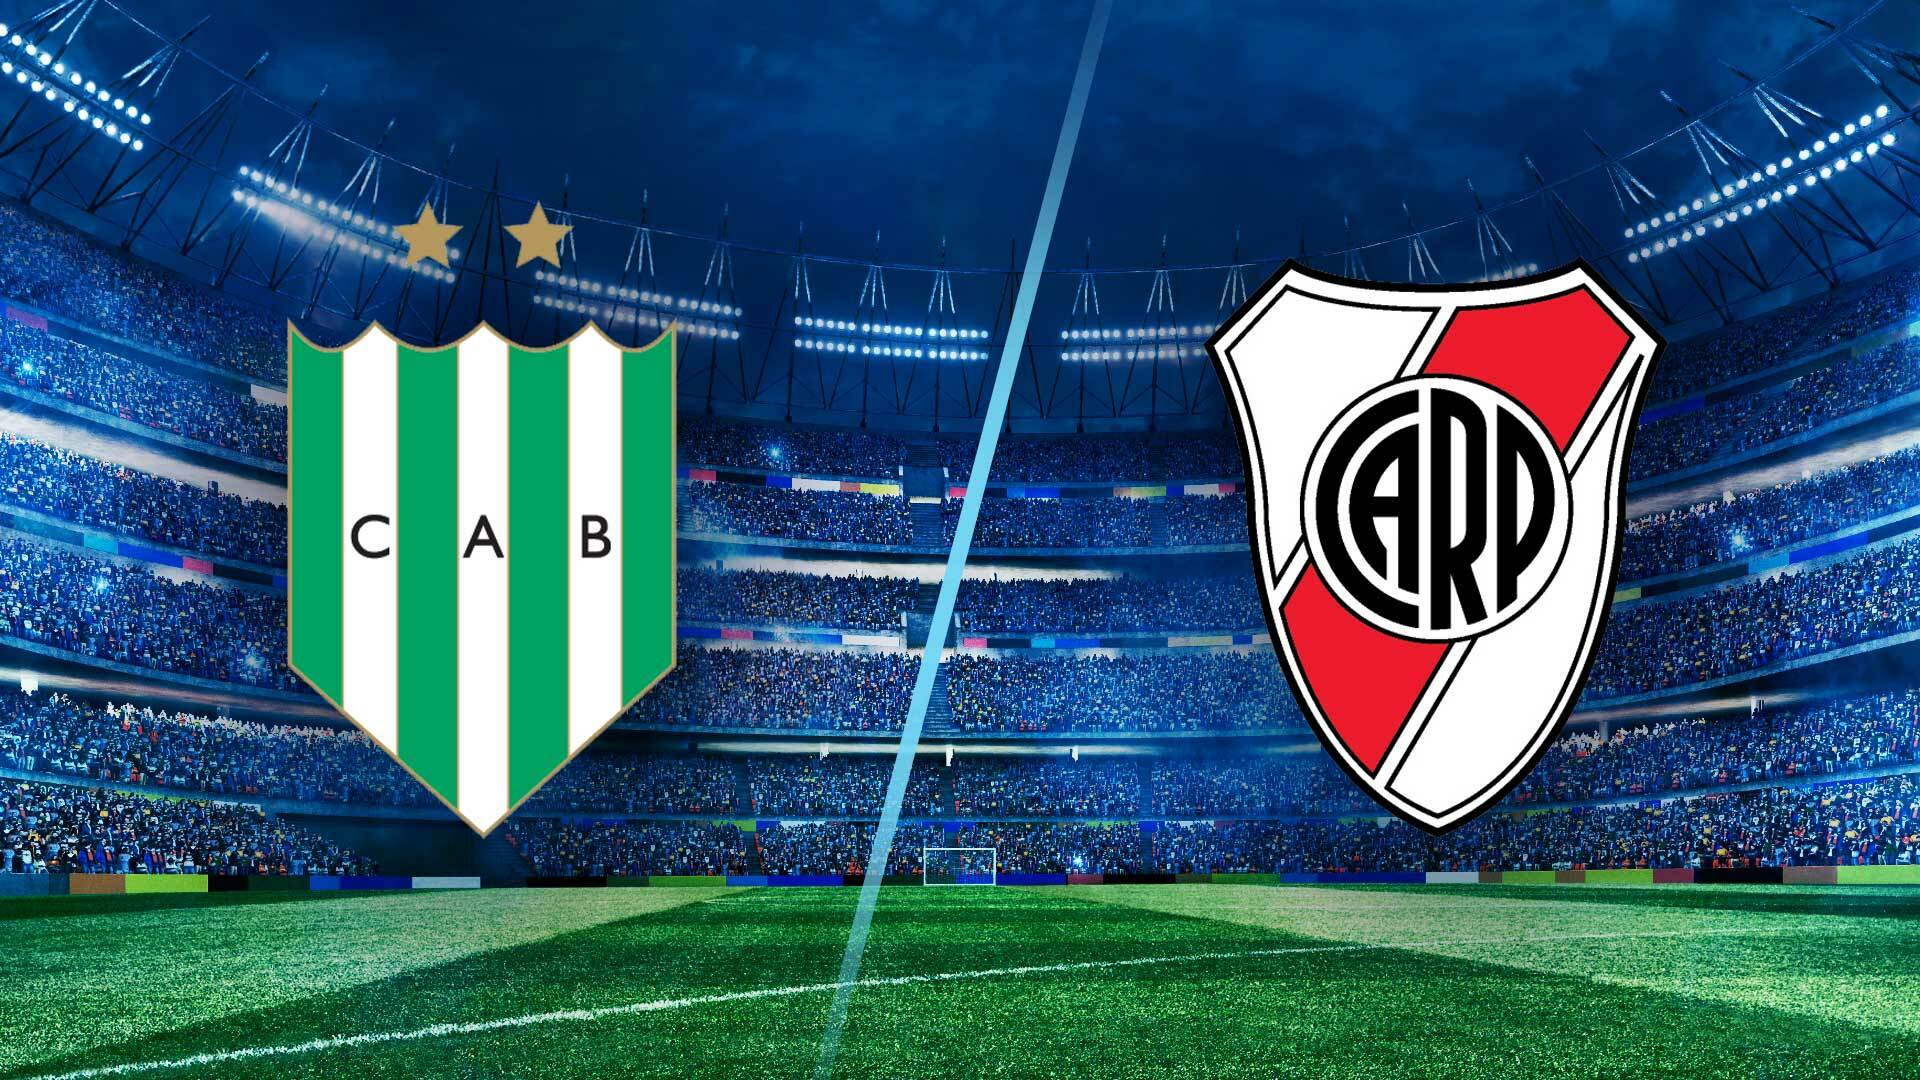  ARGENTINA: Supercup River Plate vs Banfield Live Score and Live Stream